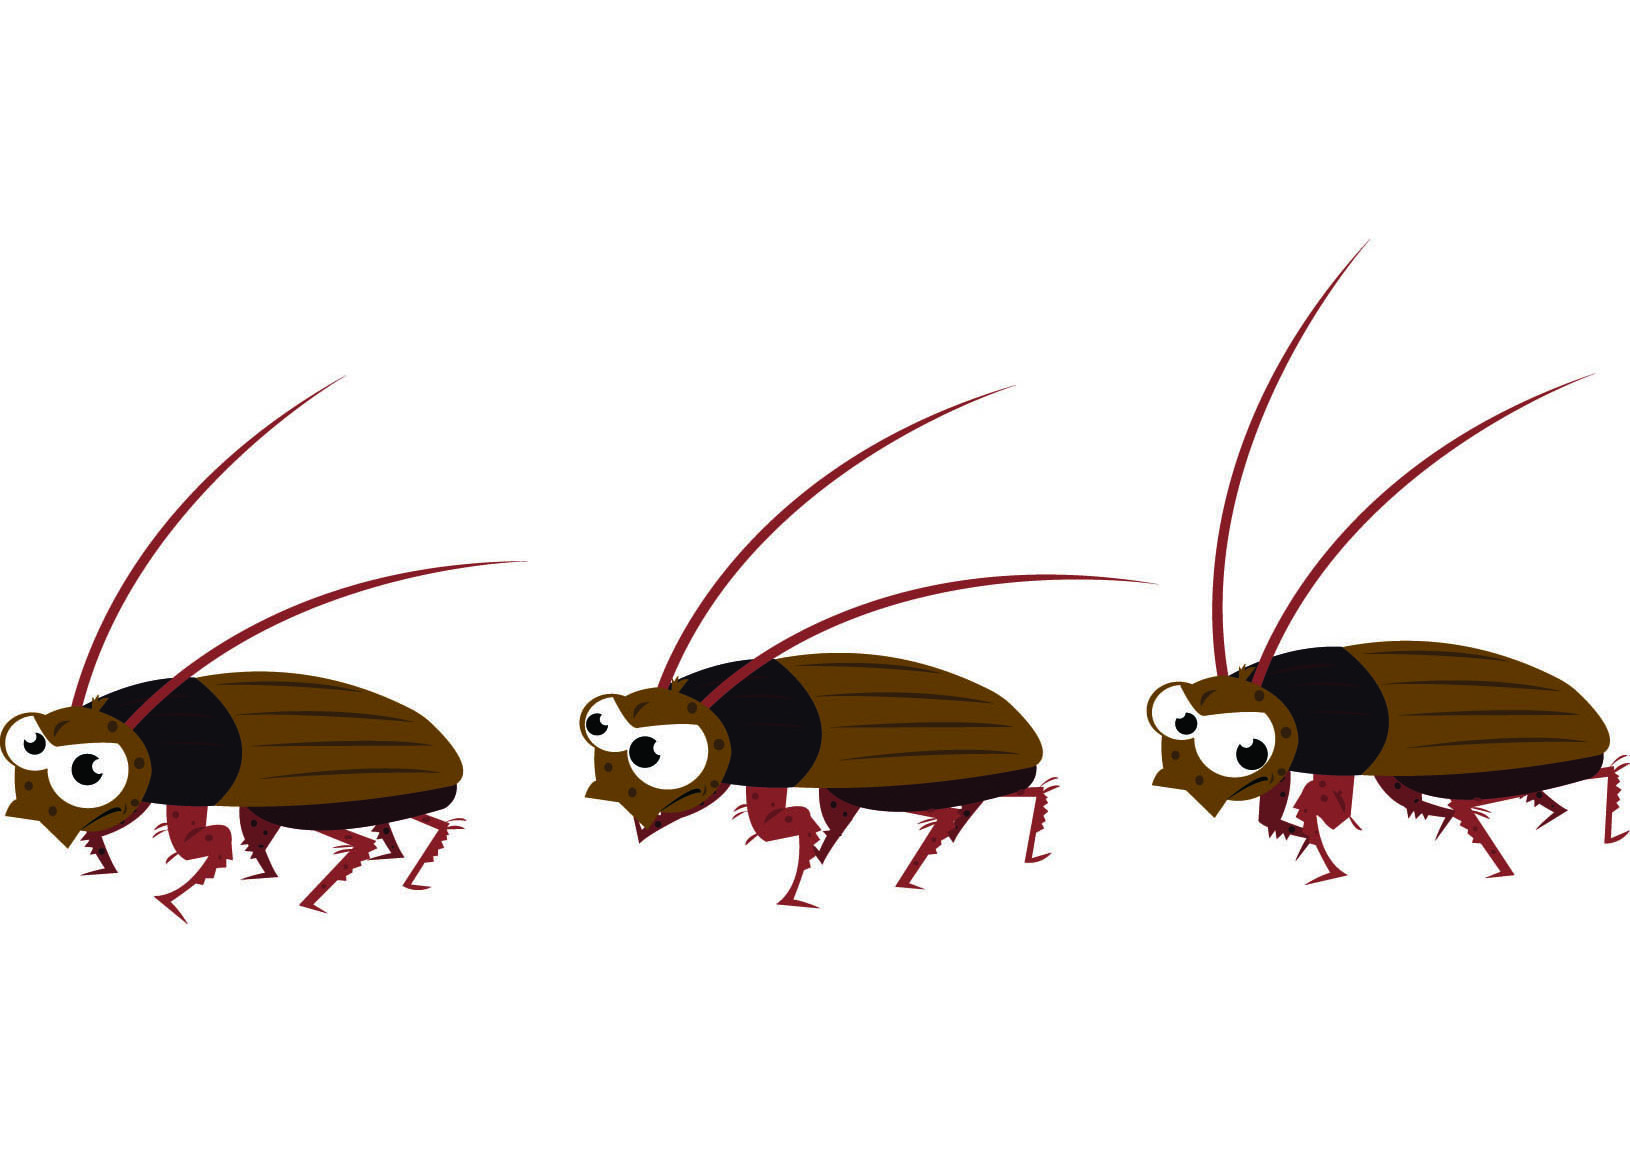 Ugly roaches.